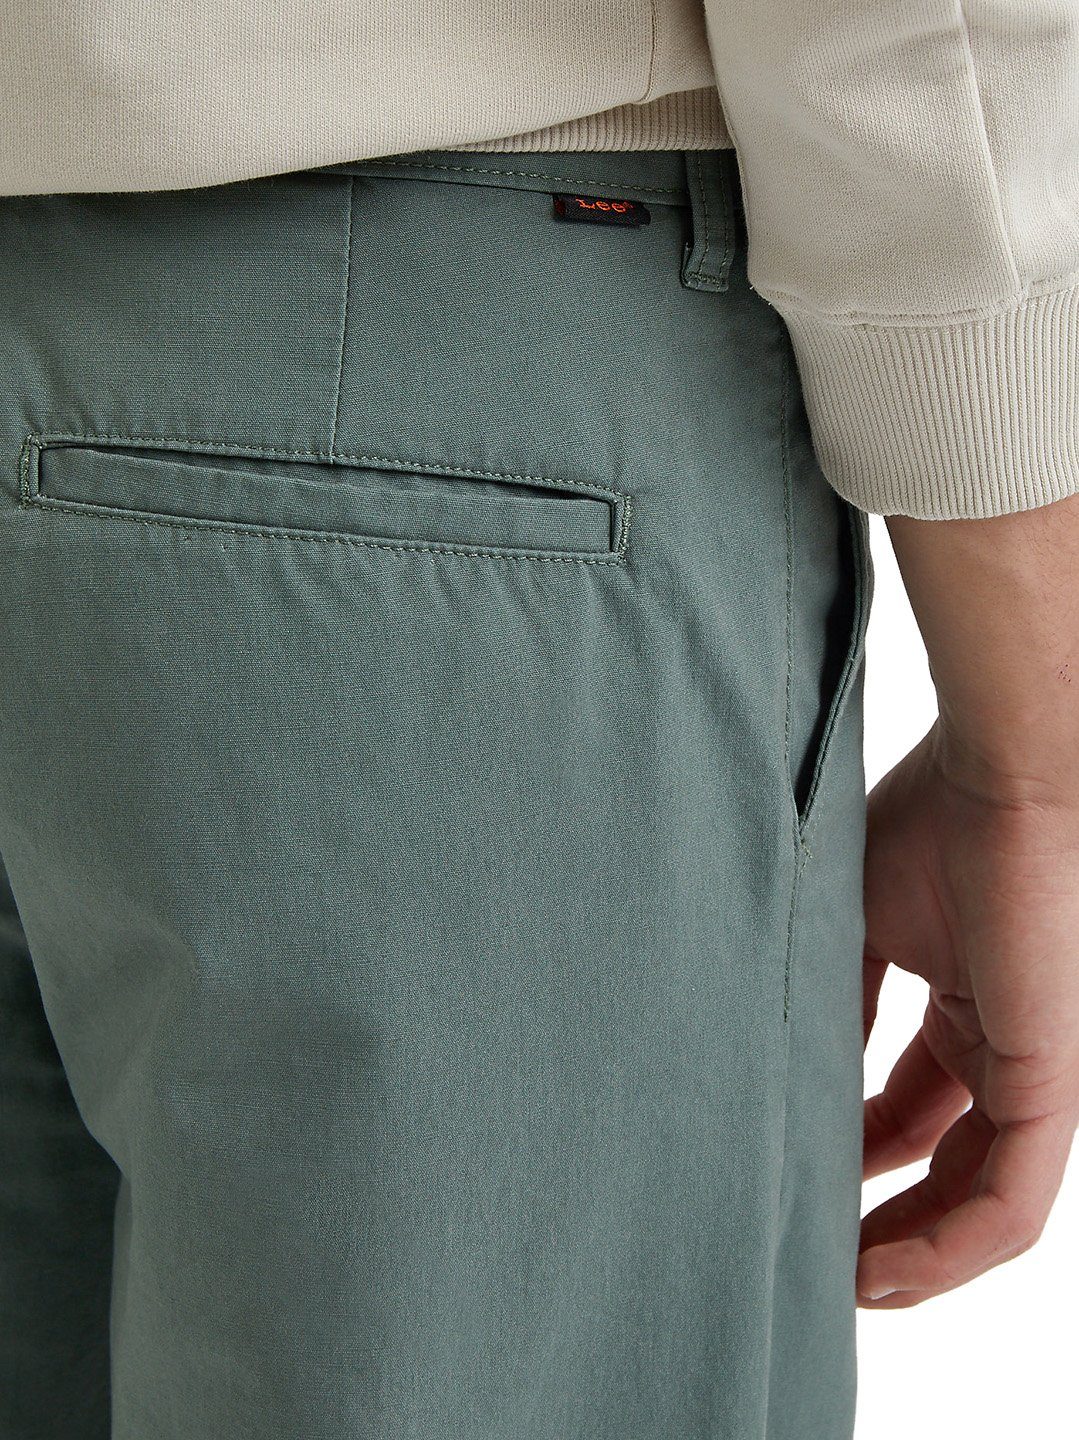 - Chinohose Länge:32 Relaxed Chino Hose Olivgrün - Relaxed Lee®